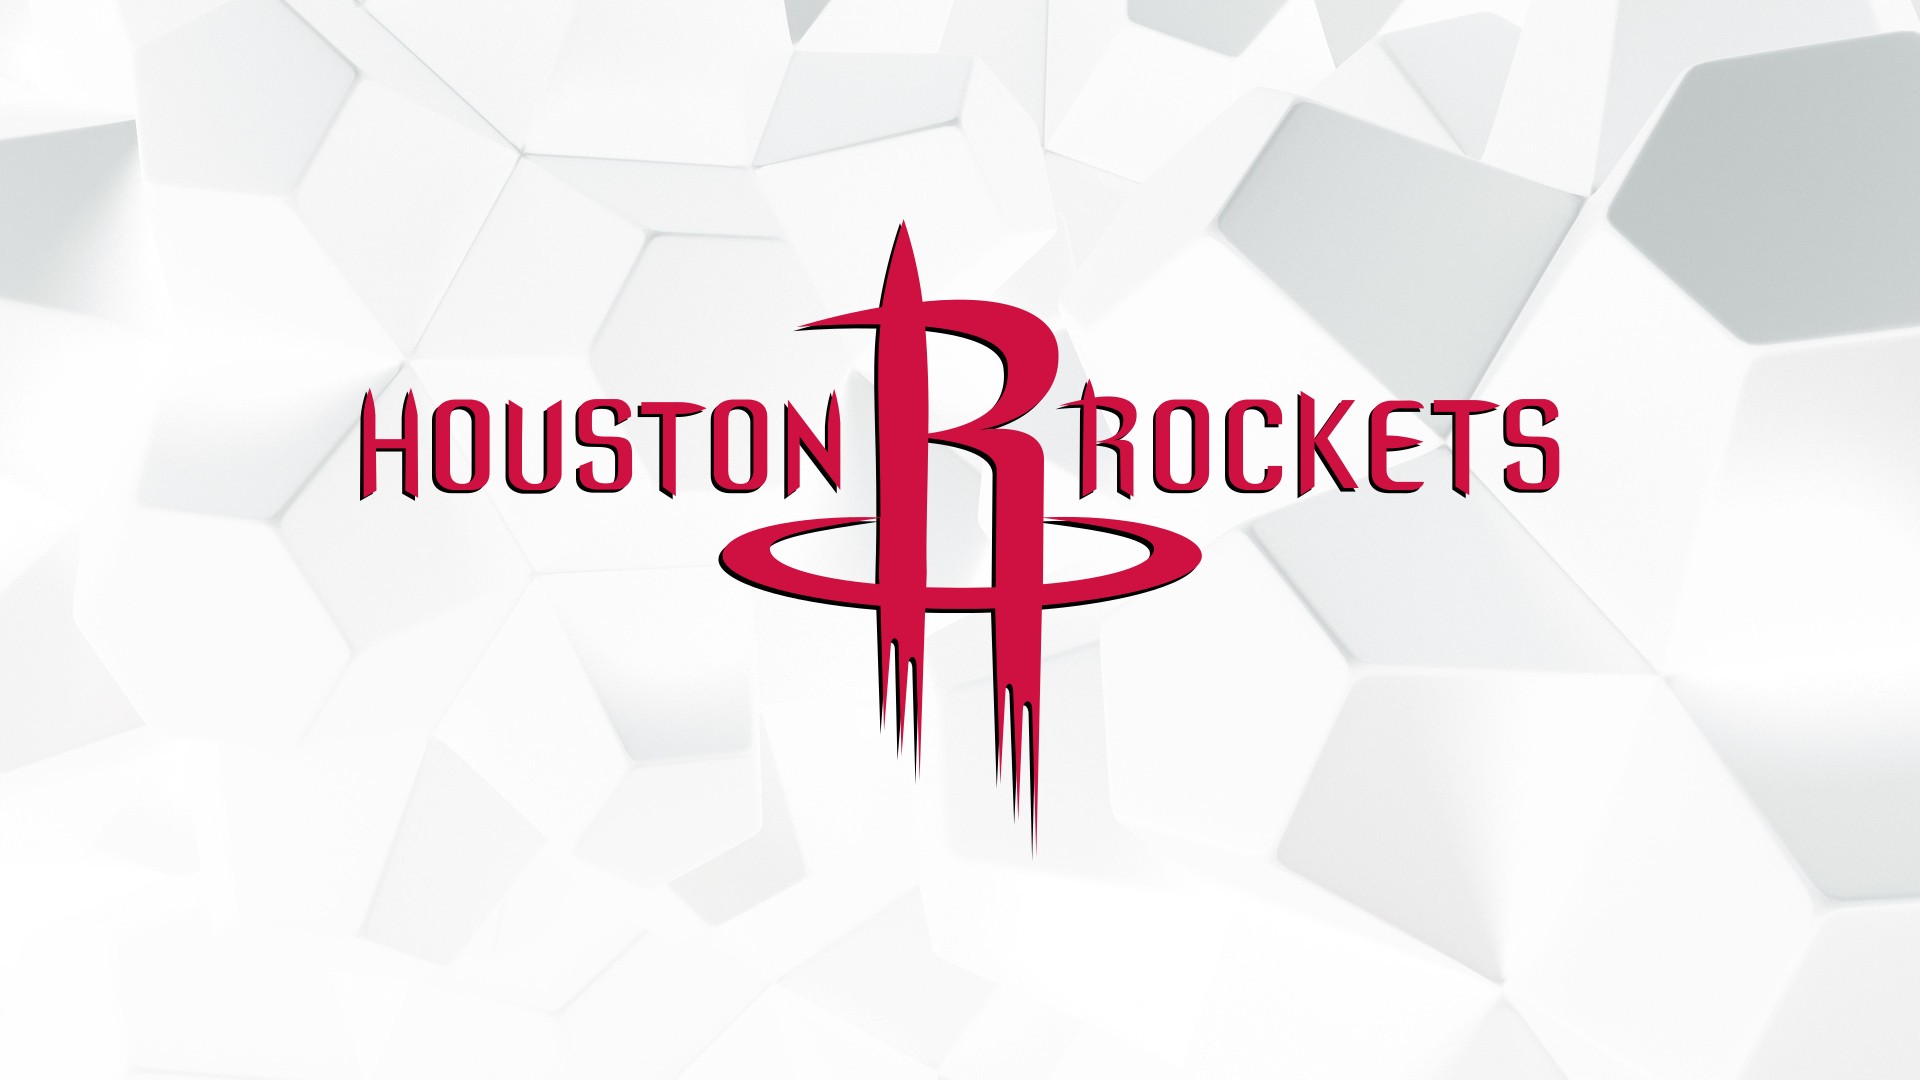 Wallpaper Desktop Houston Rockets HD with image dimensions 1920x1080 pixel. You can make this wallpaper for your Desktop Computer Backgrounds, Windows or Mac Screensavers, iPhone Lock screen, Tablet or Android and another Mobile Phone device